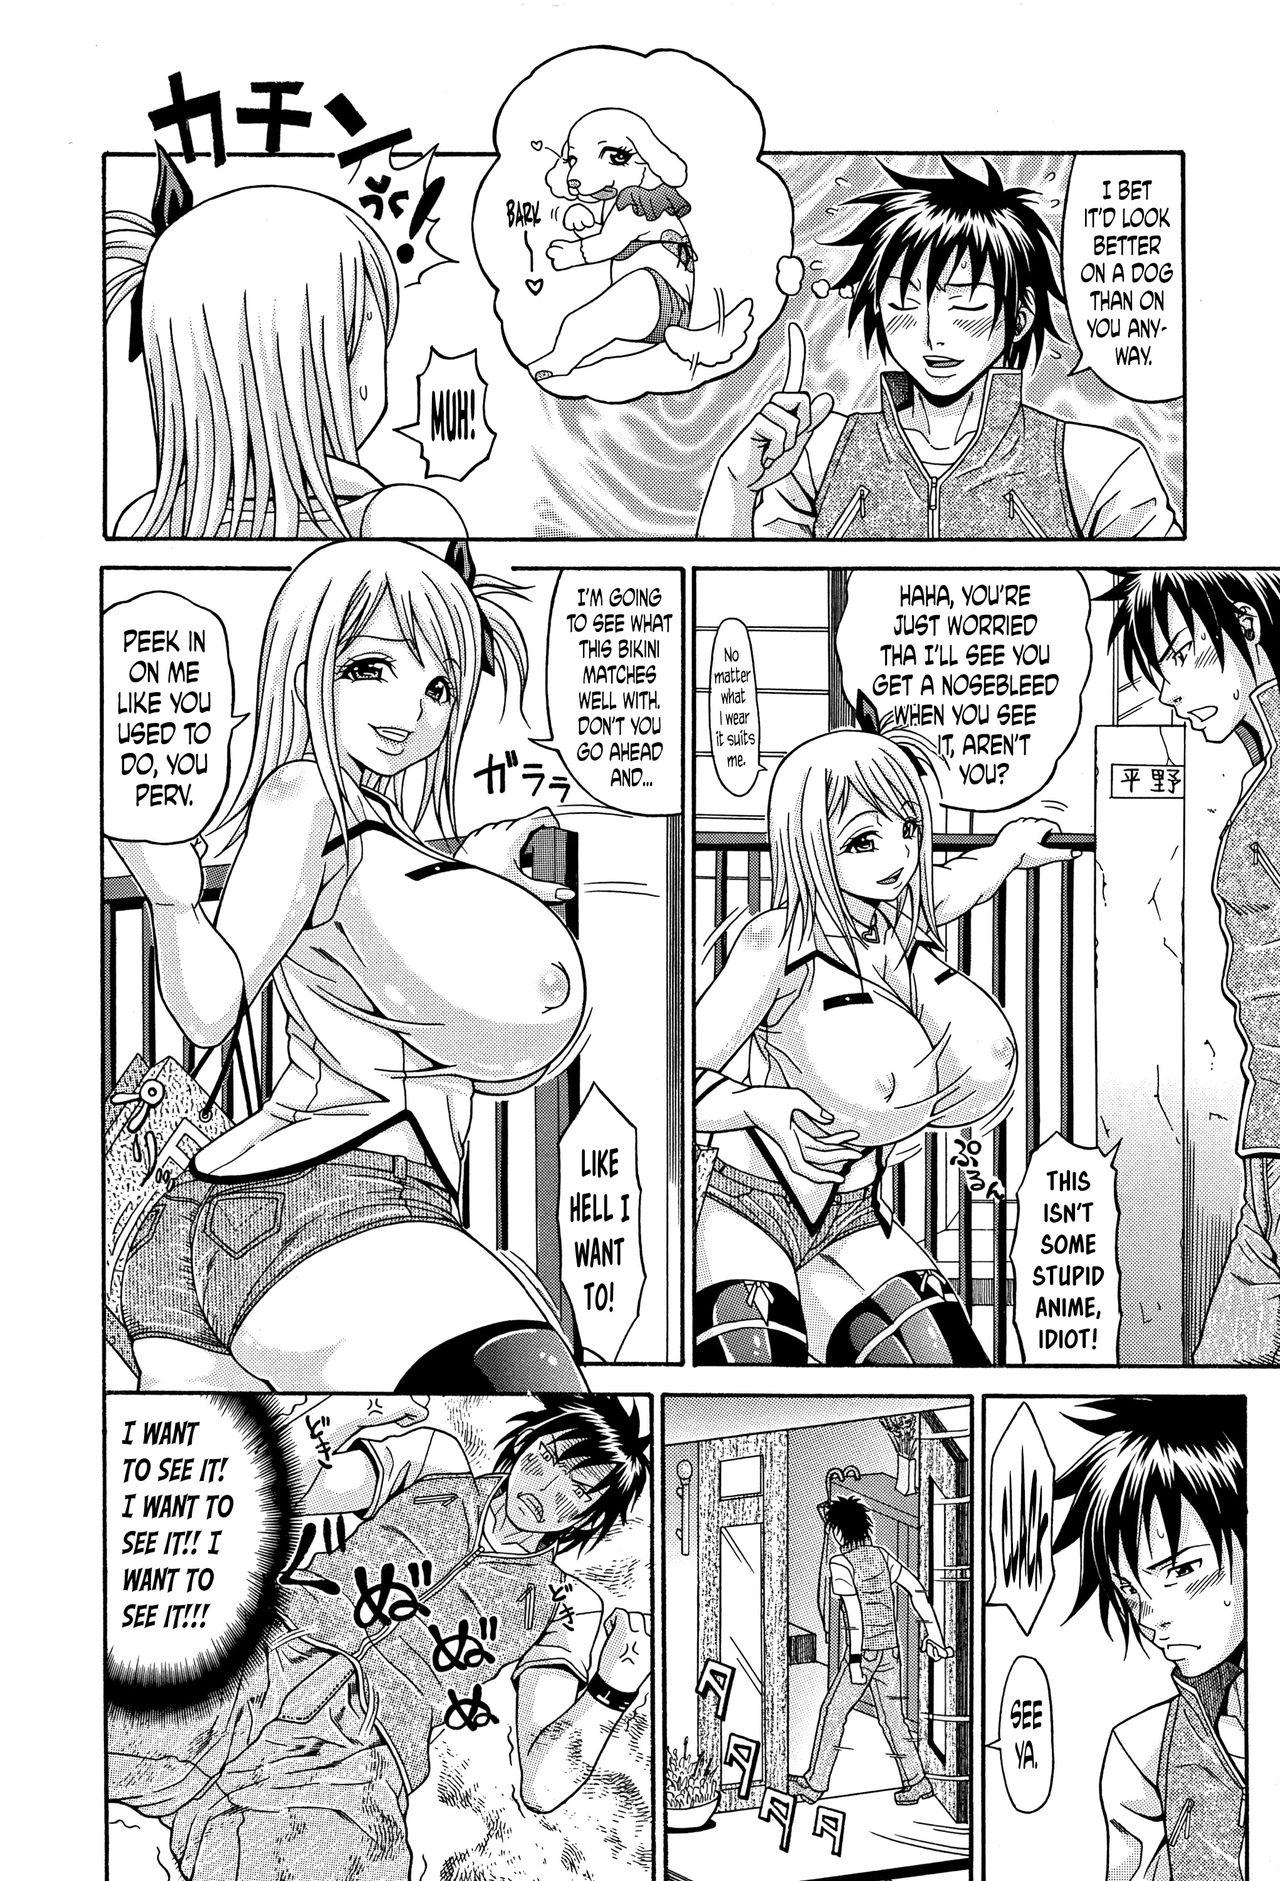 [Andou Hiroyuki] Mamire Chichi - Sticky Tits Feel Hot All Over. Ch.1-4 [English] [doujin-moe.us] 38